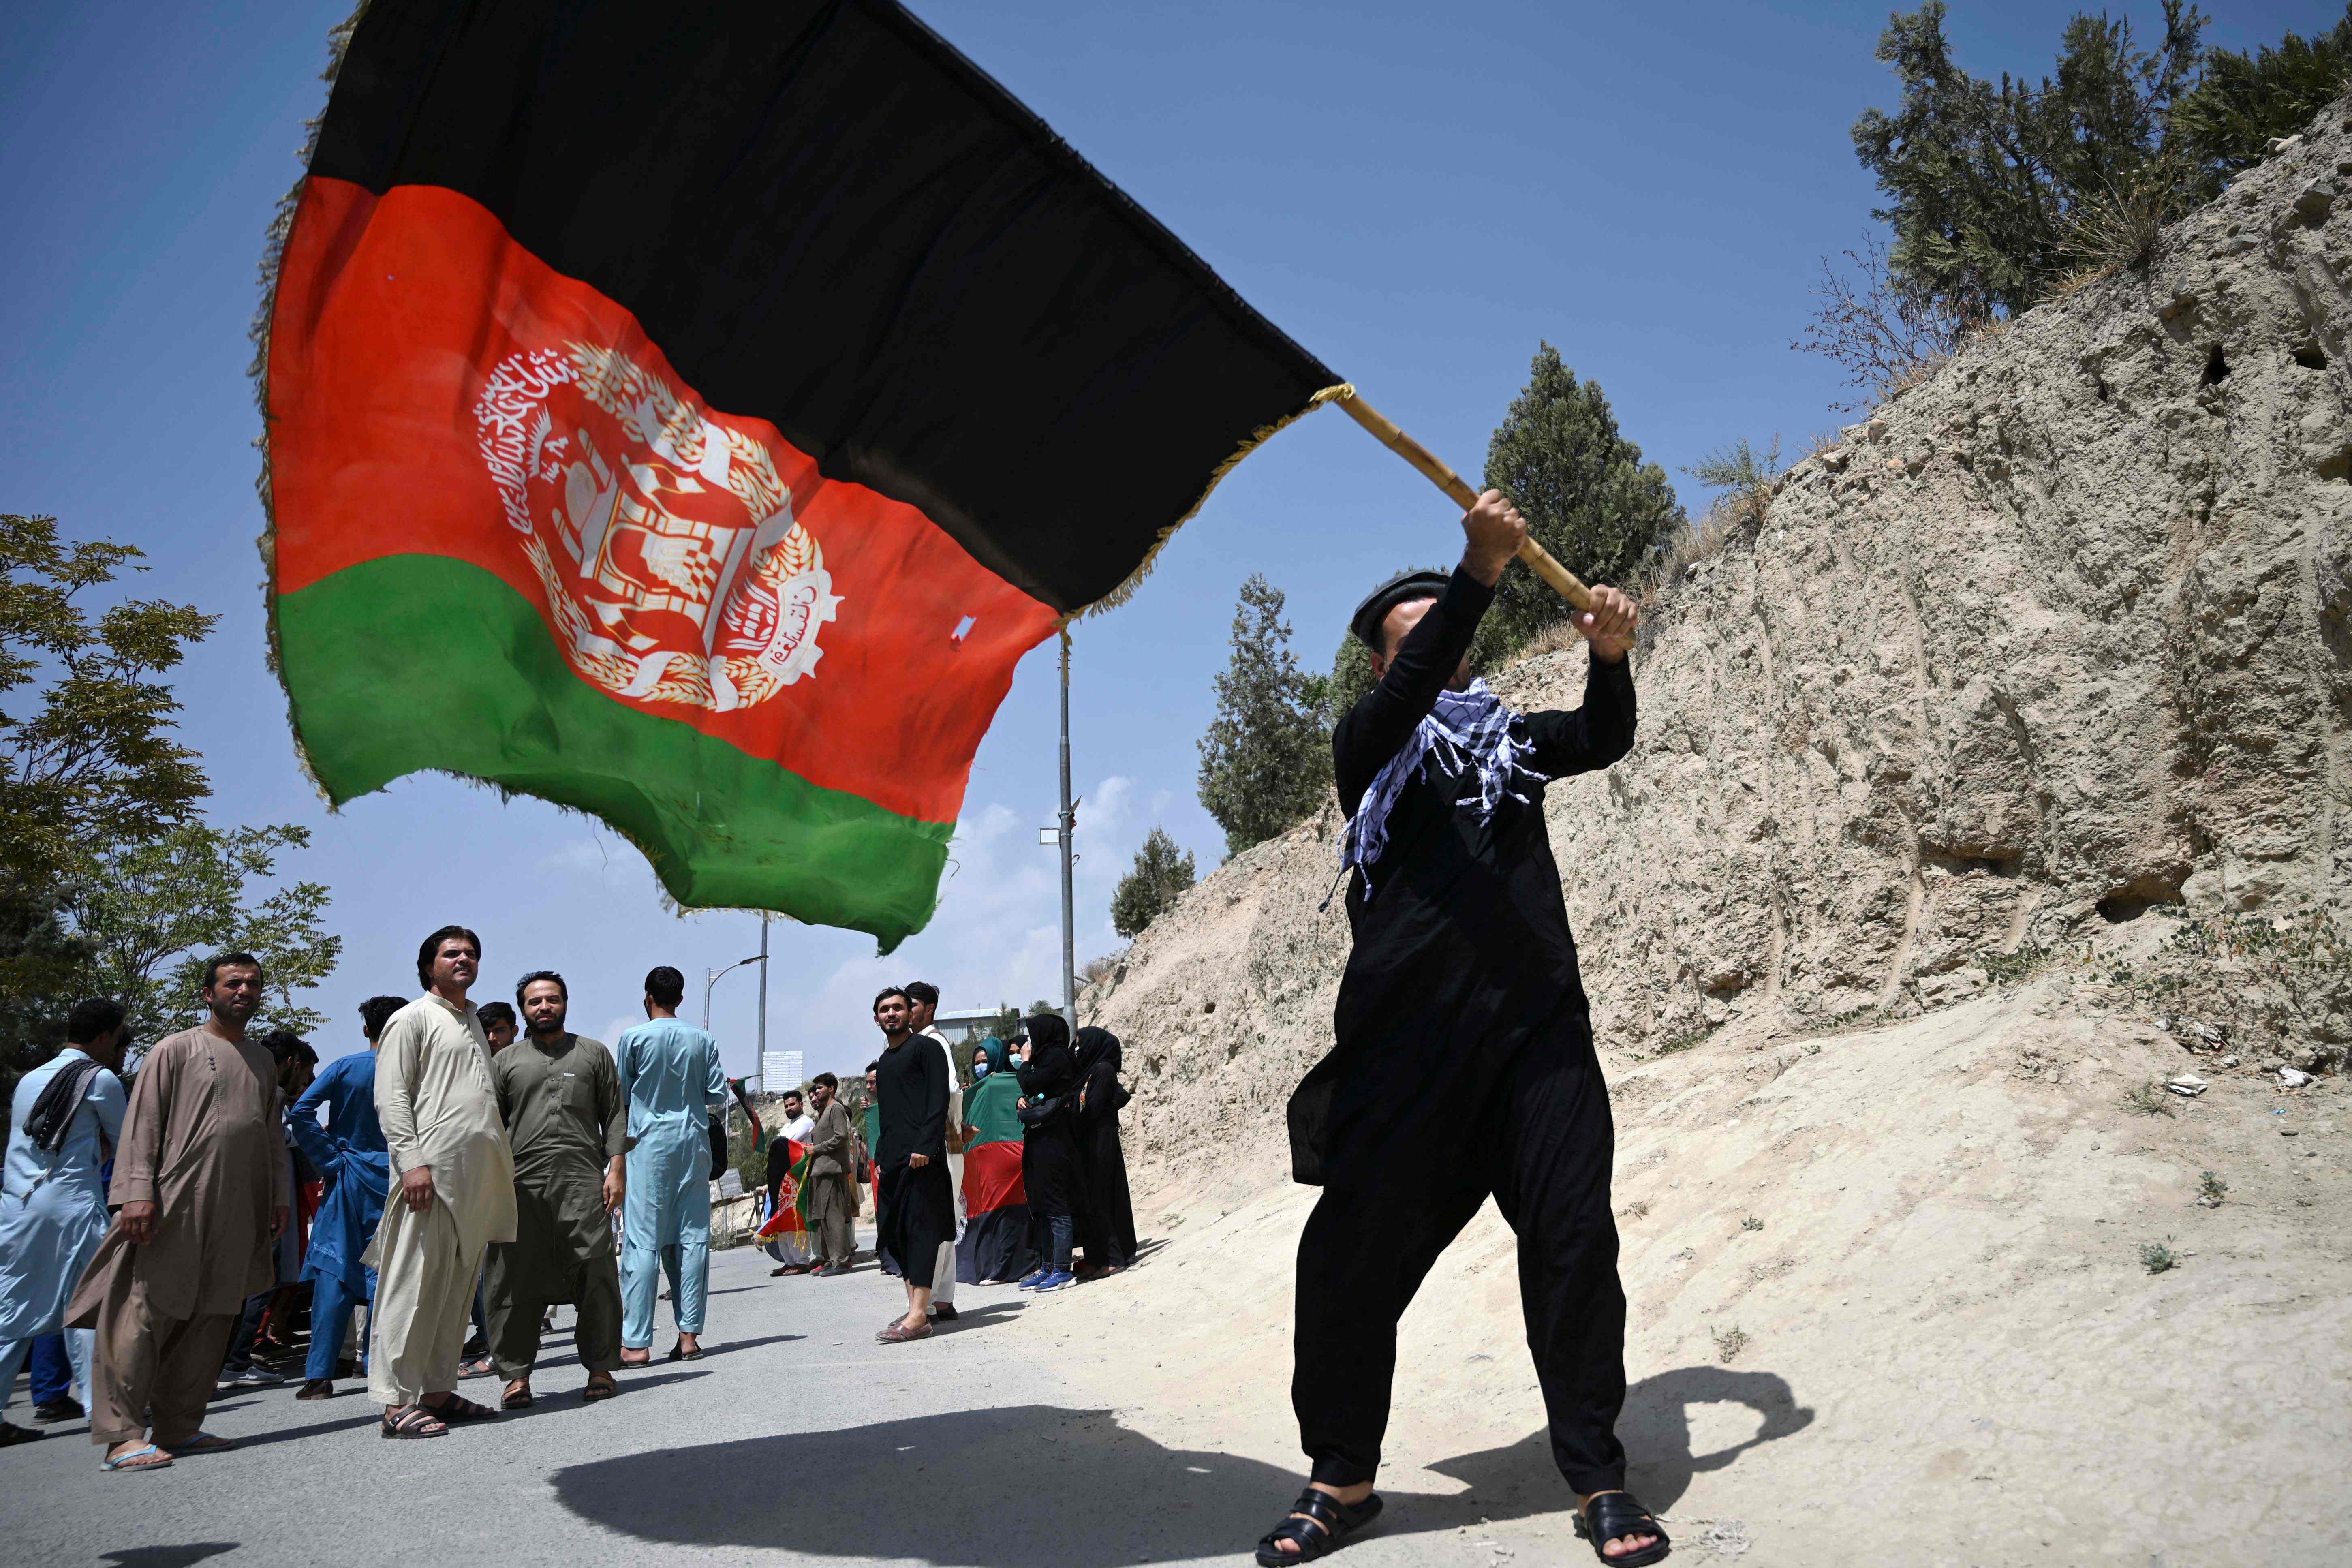 An Afghan waves the national flag as they celebrate the 102nd Independence Day of Afghanistan in Kabul on 19 August 2021